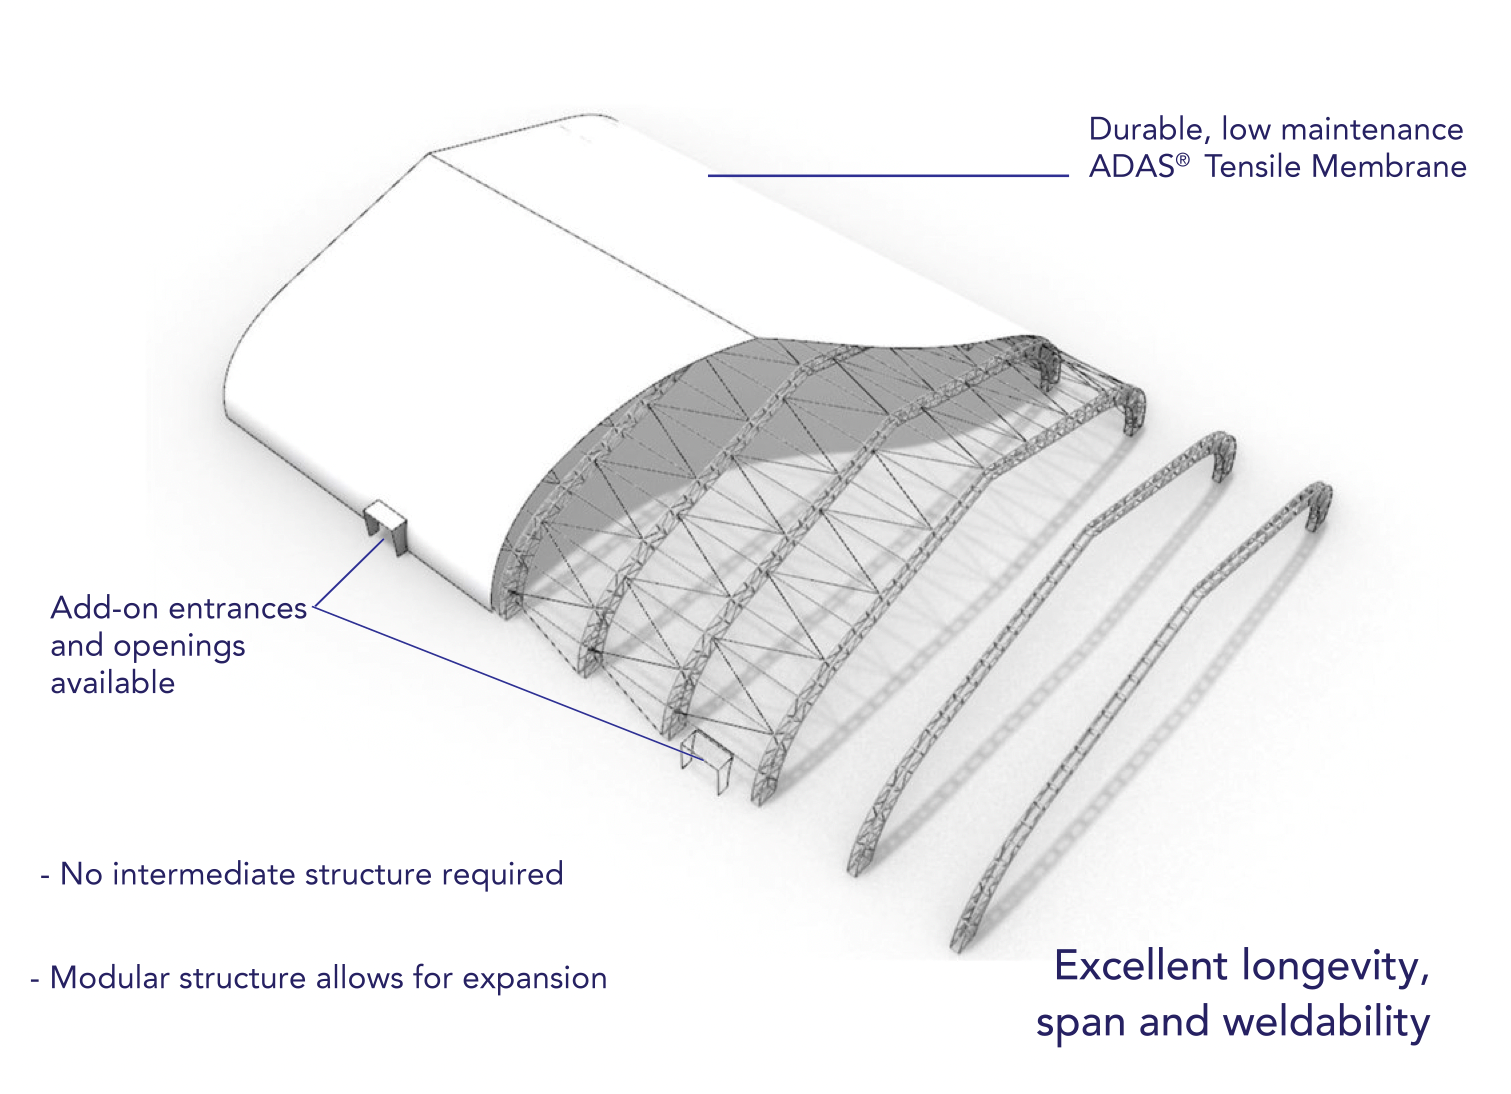 large span structure cutaway diagram showing structural steel modularity with tensile membrane covering